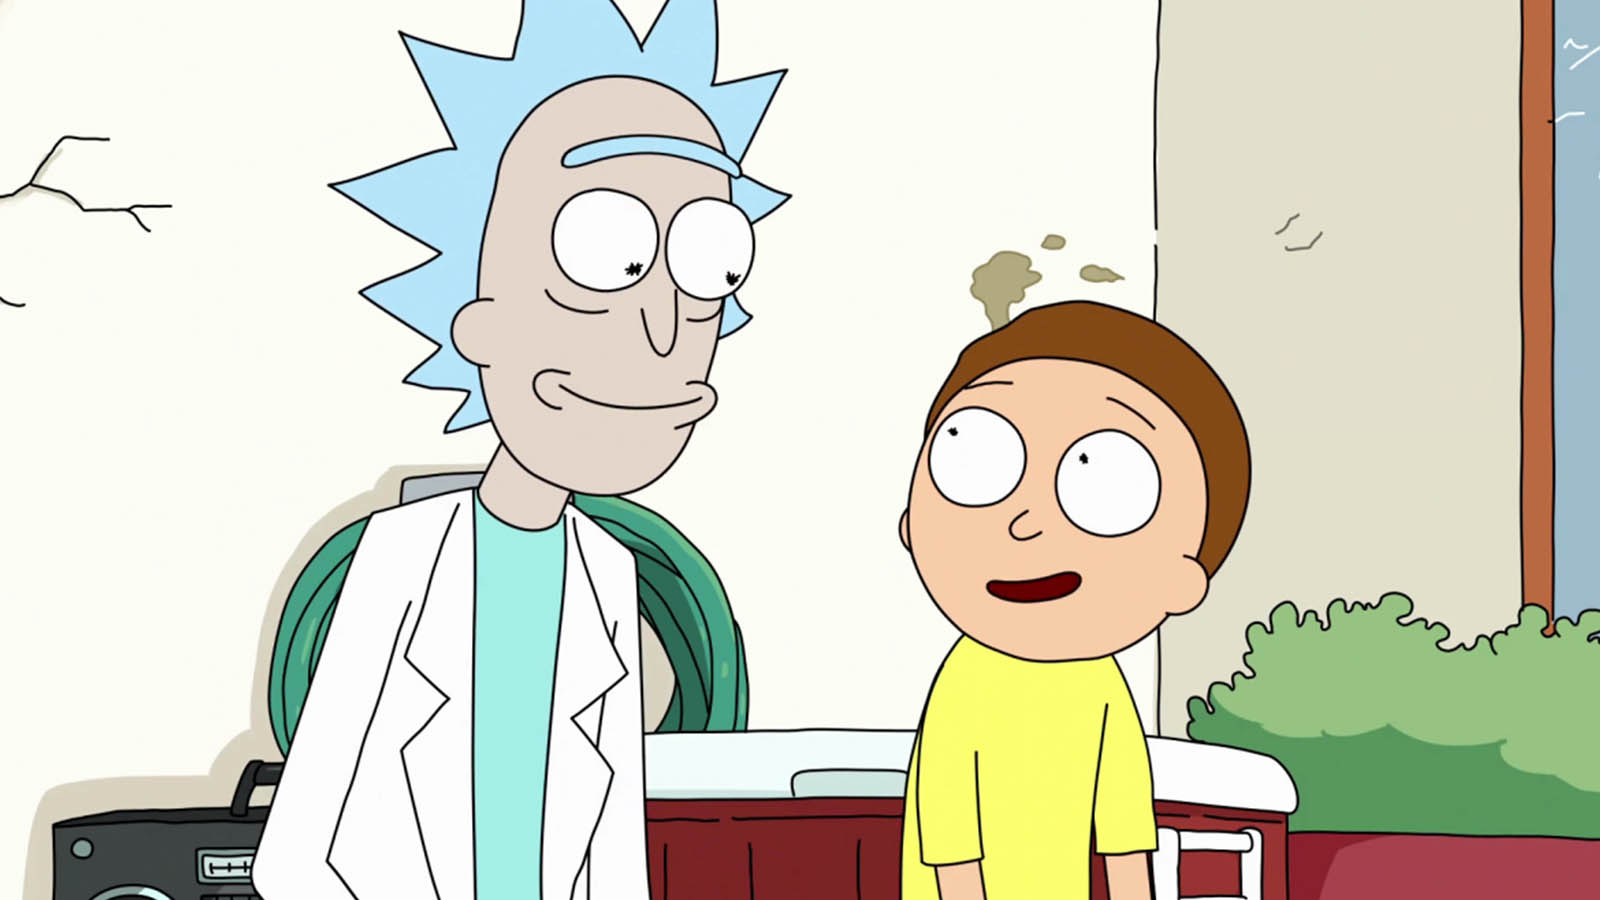 Rick and Morty Season 4 Episode 6 Release Date Leaked Second Part of Show to Return in February 2020